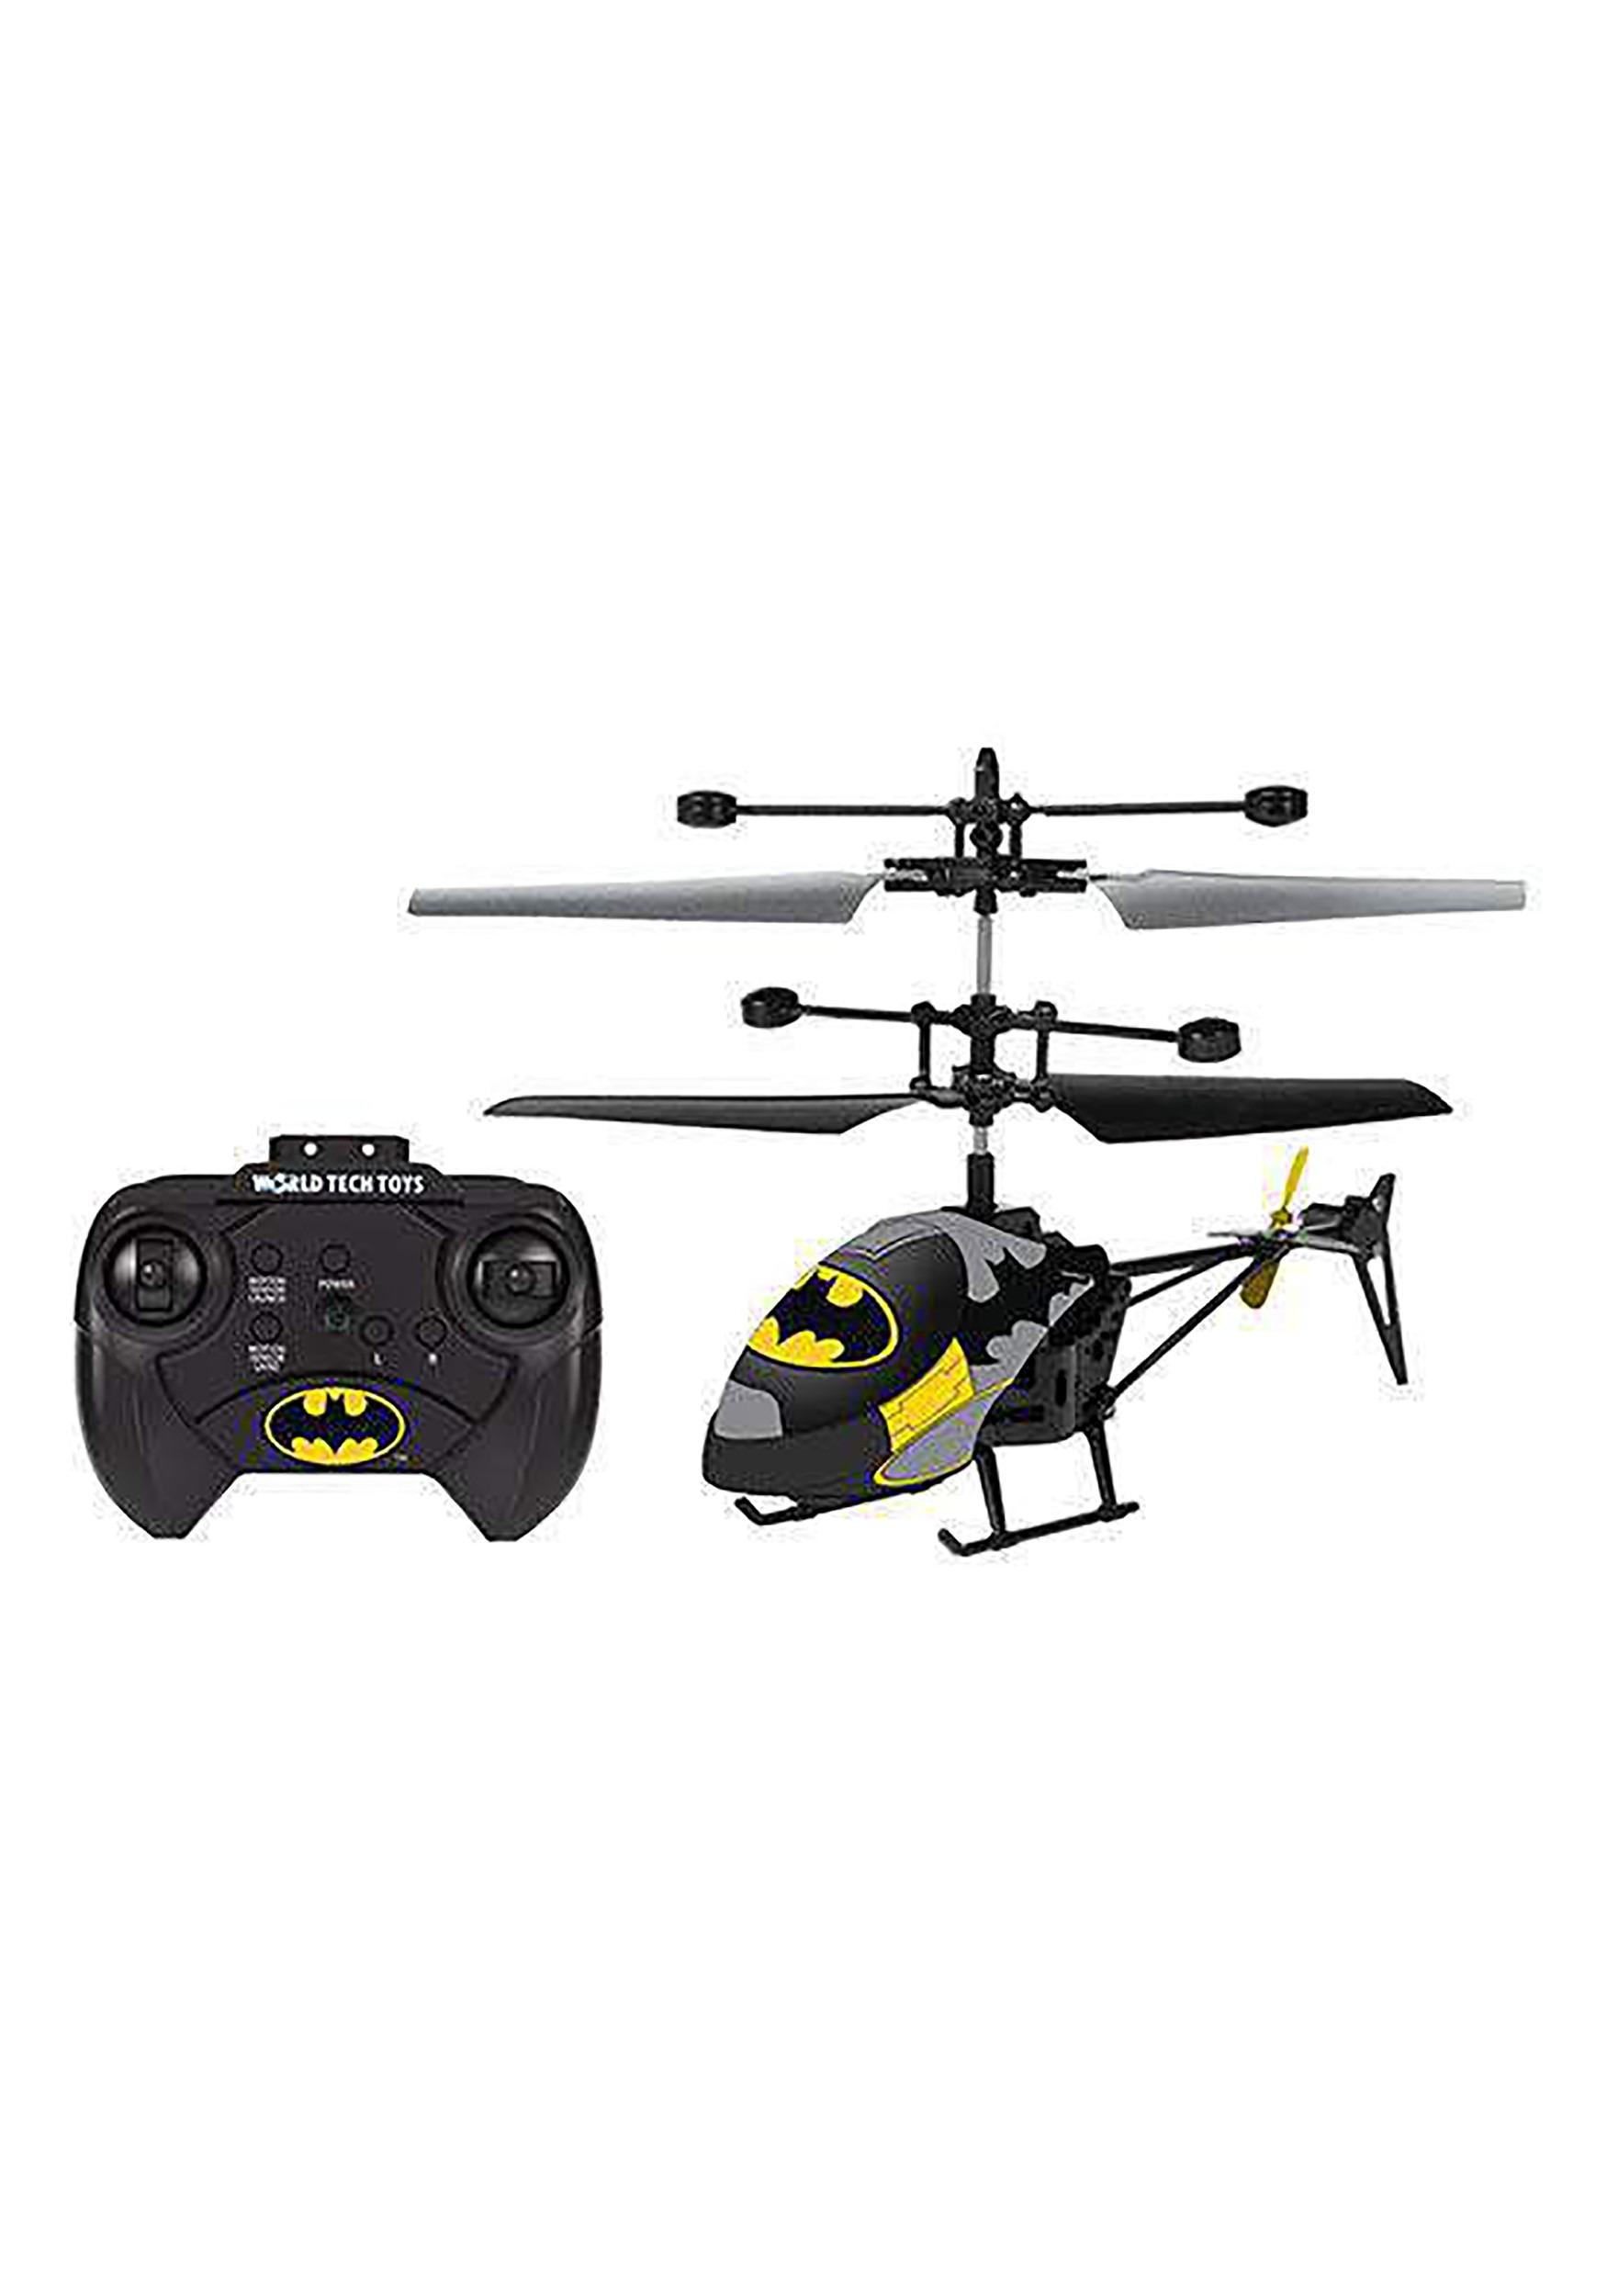 Batman Rc Helicopter: High-Performance and Durable: The Batman RC Helicopter